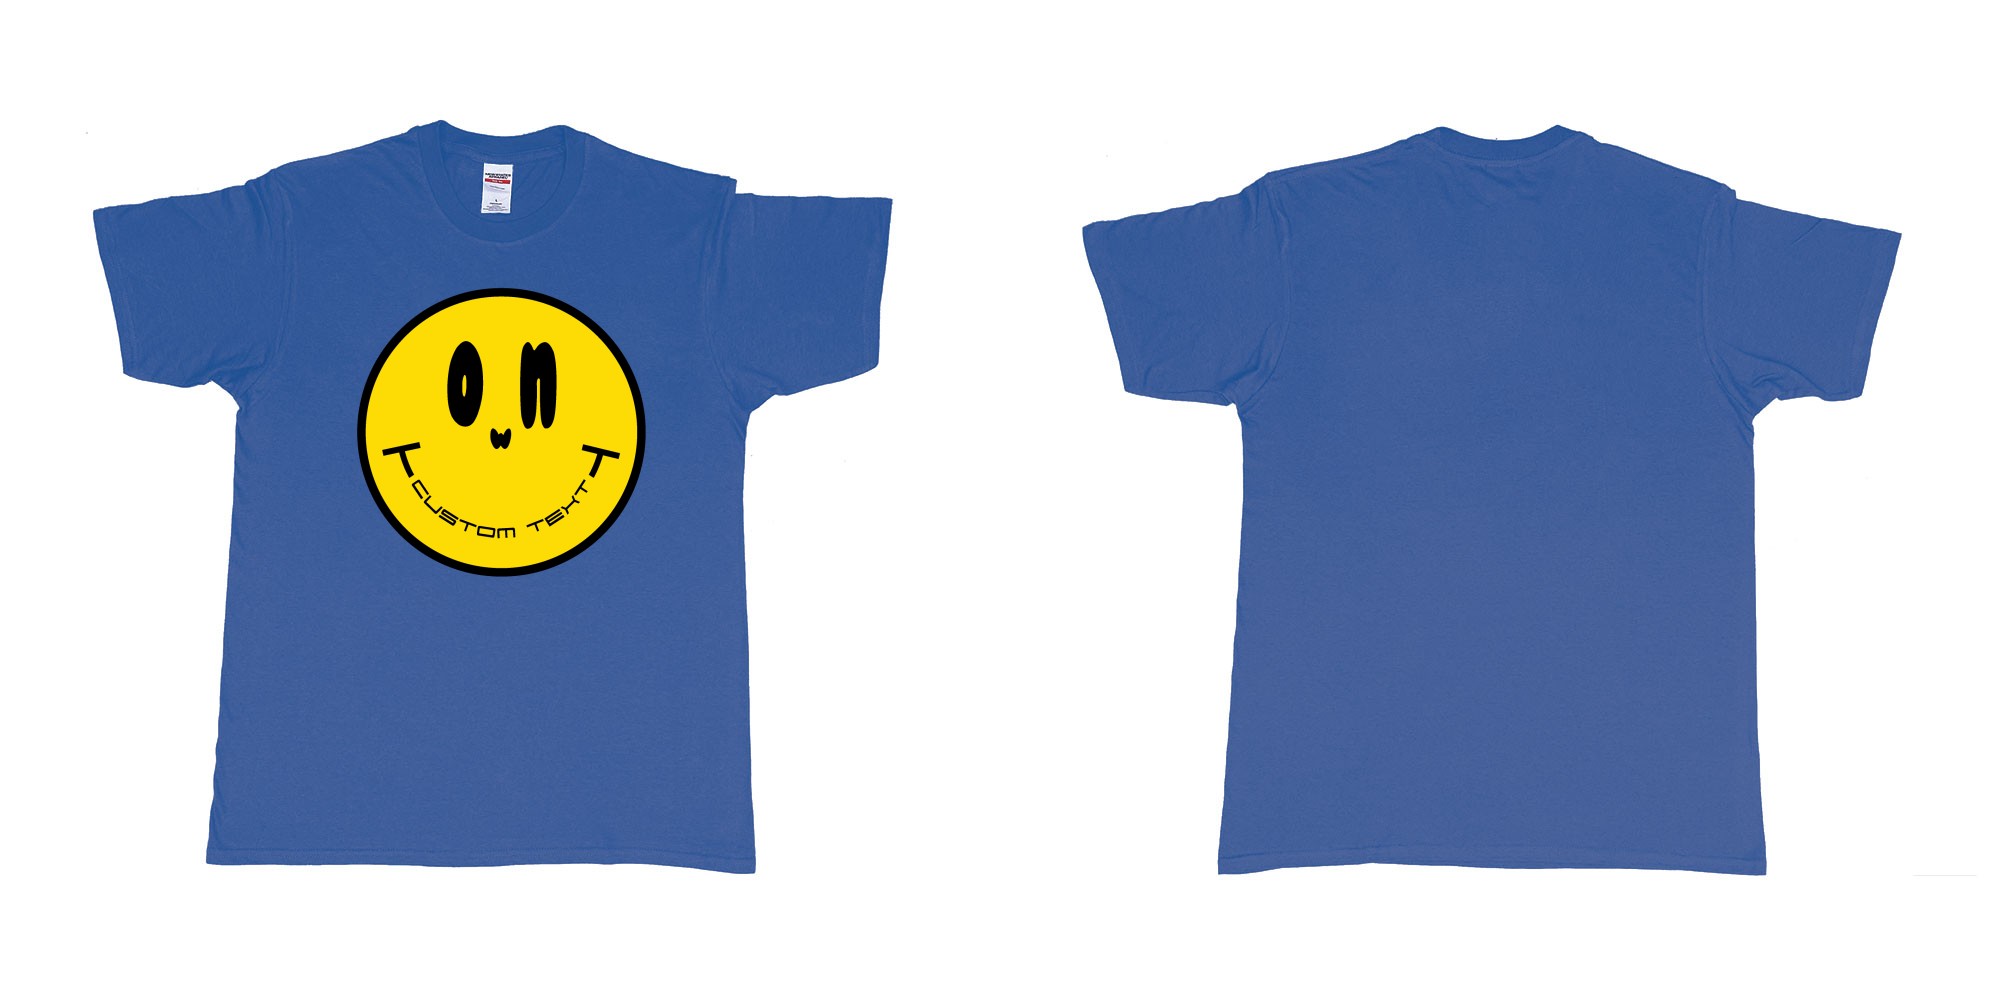 Custom tshirt design smiley face emoji custom text in fabric color royal-blue choice your own text made in Bali by The Pirate Way